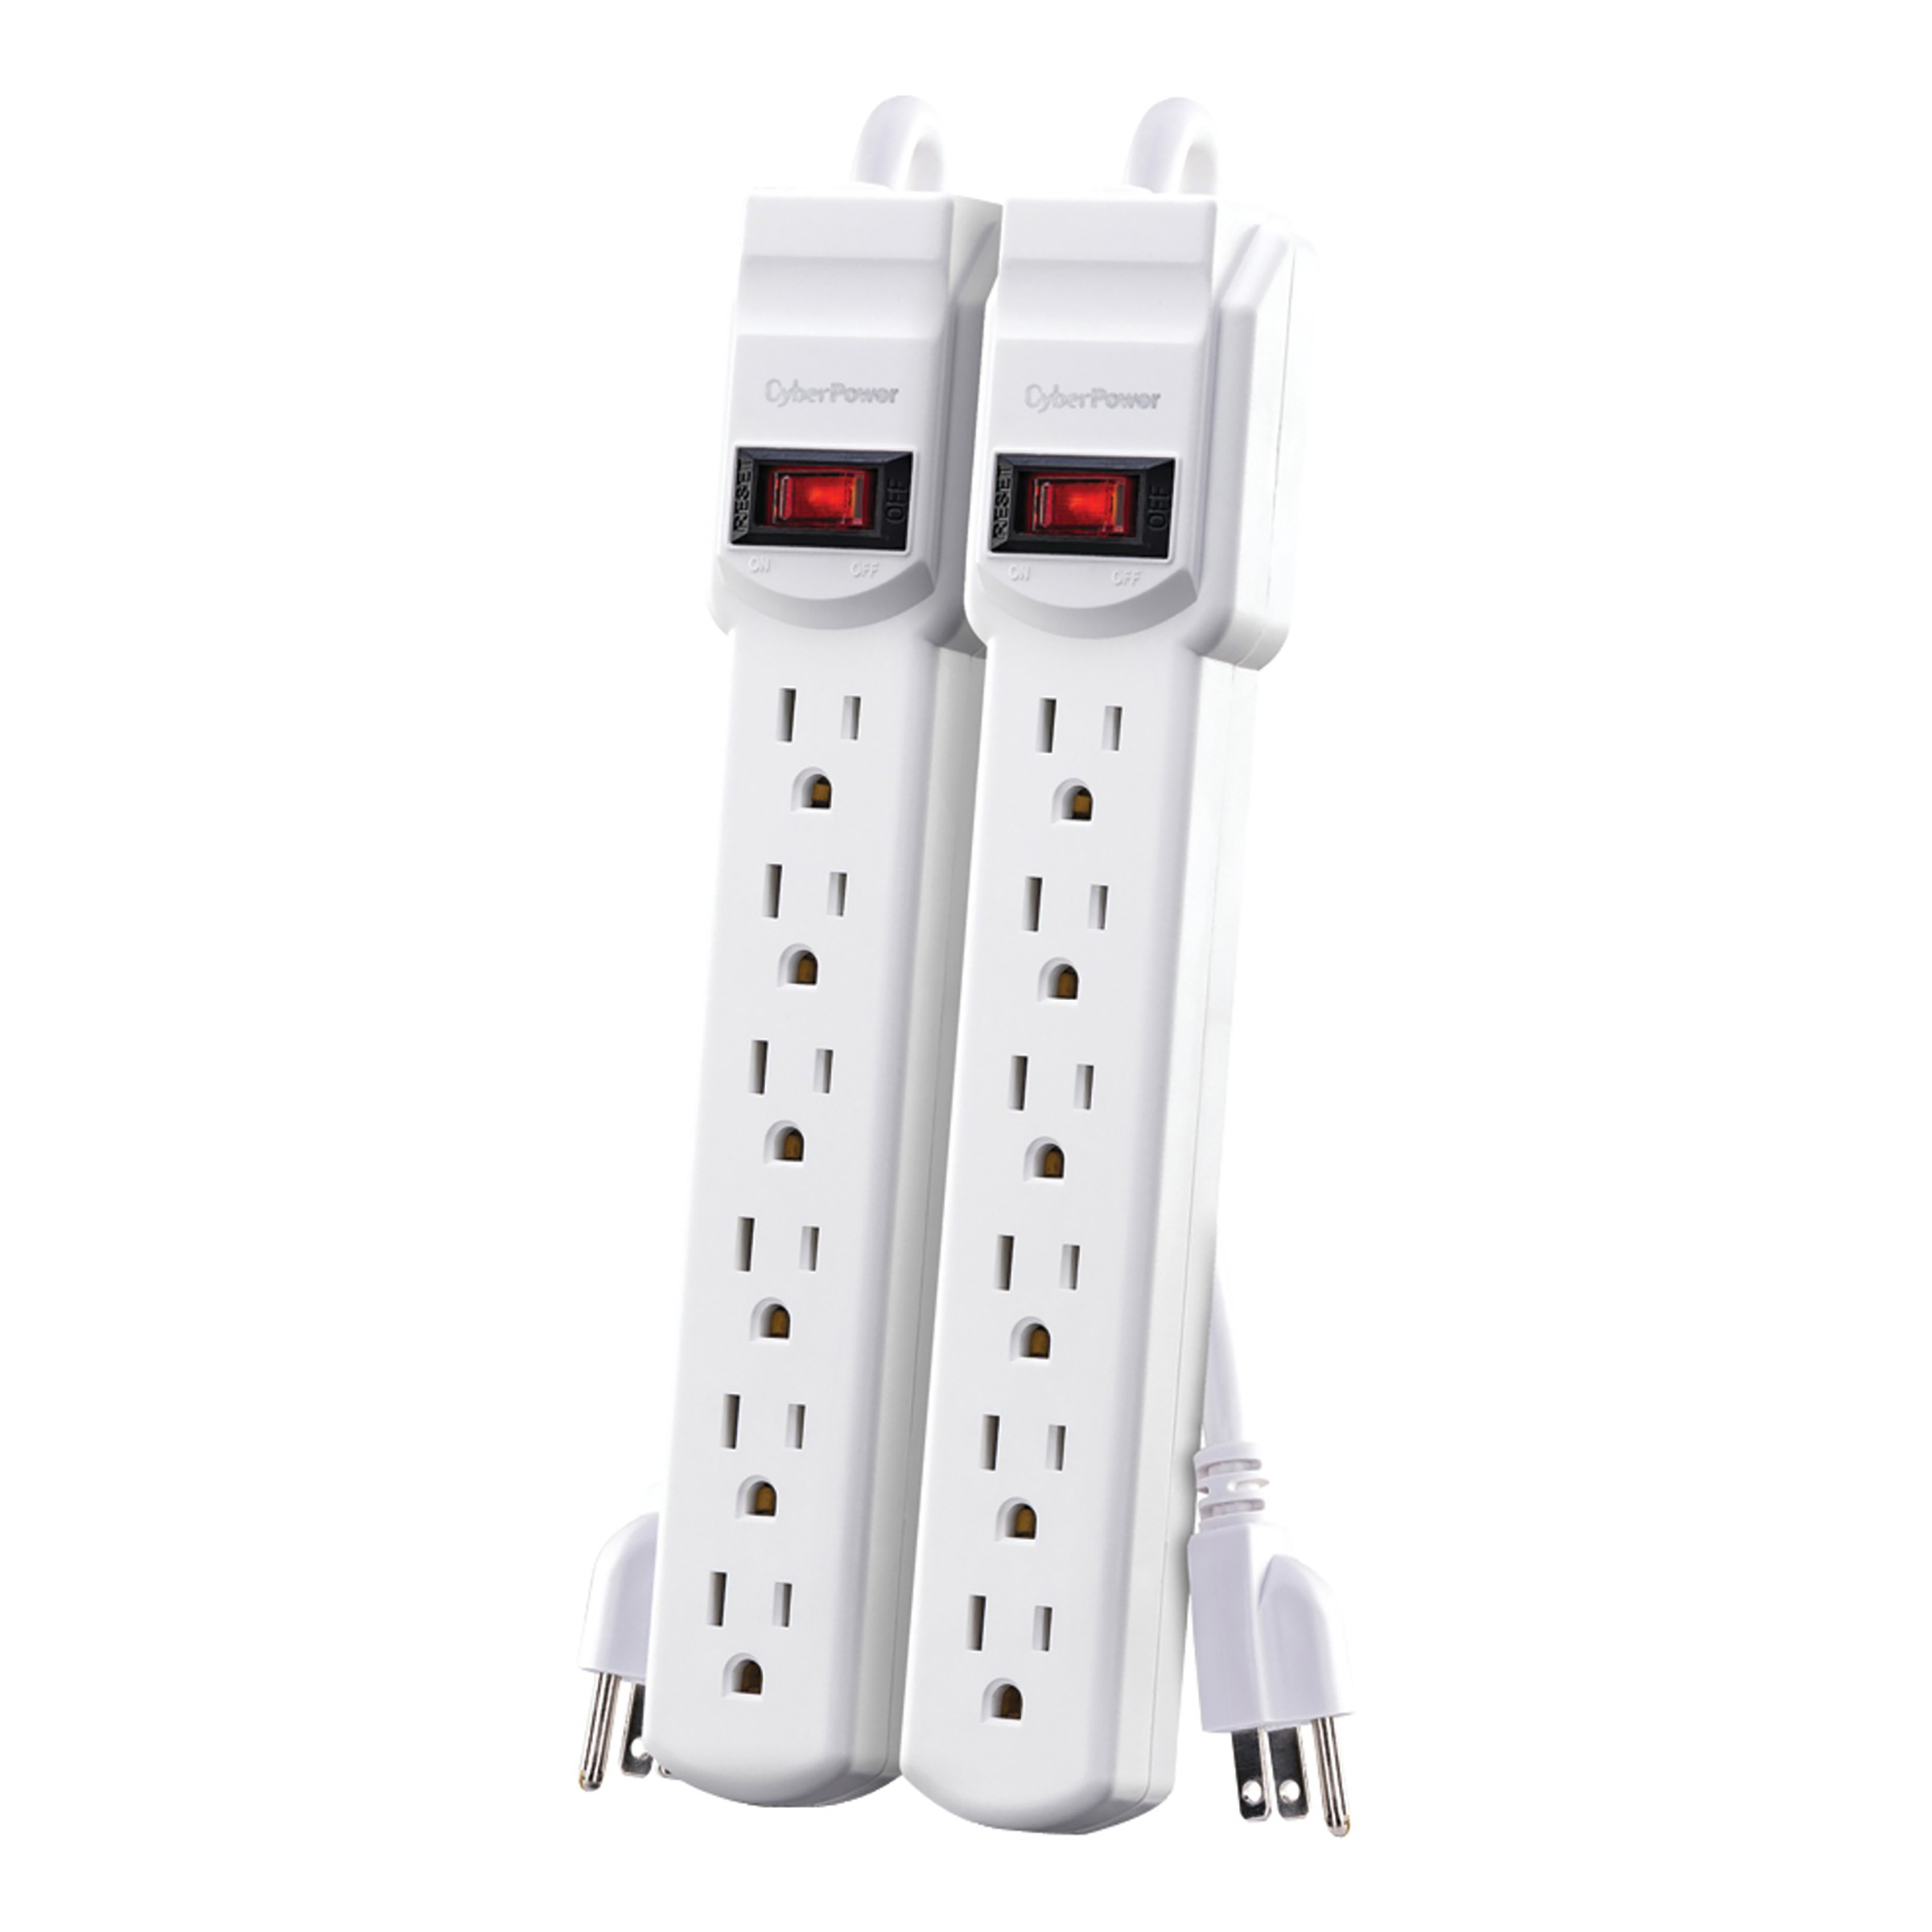 CyberPower, 6-Outlet Power Strip, 2-Pack, Cord Length 2 ft, Cable Gauge 14 Amps 15 Model MP1044NN